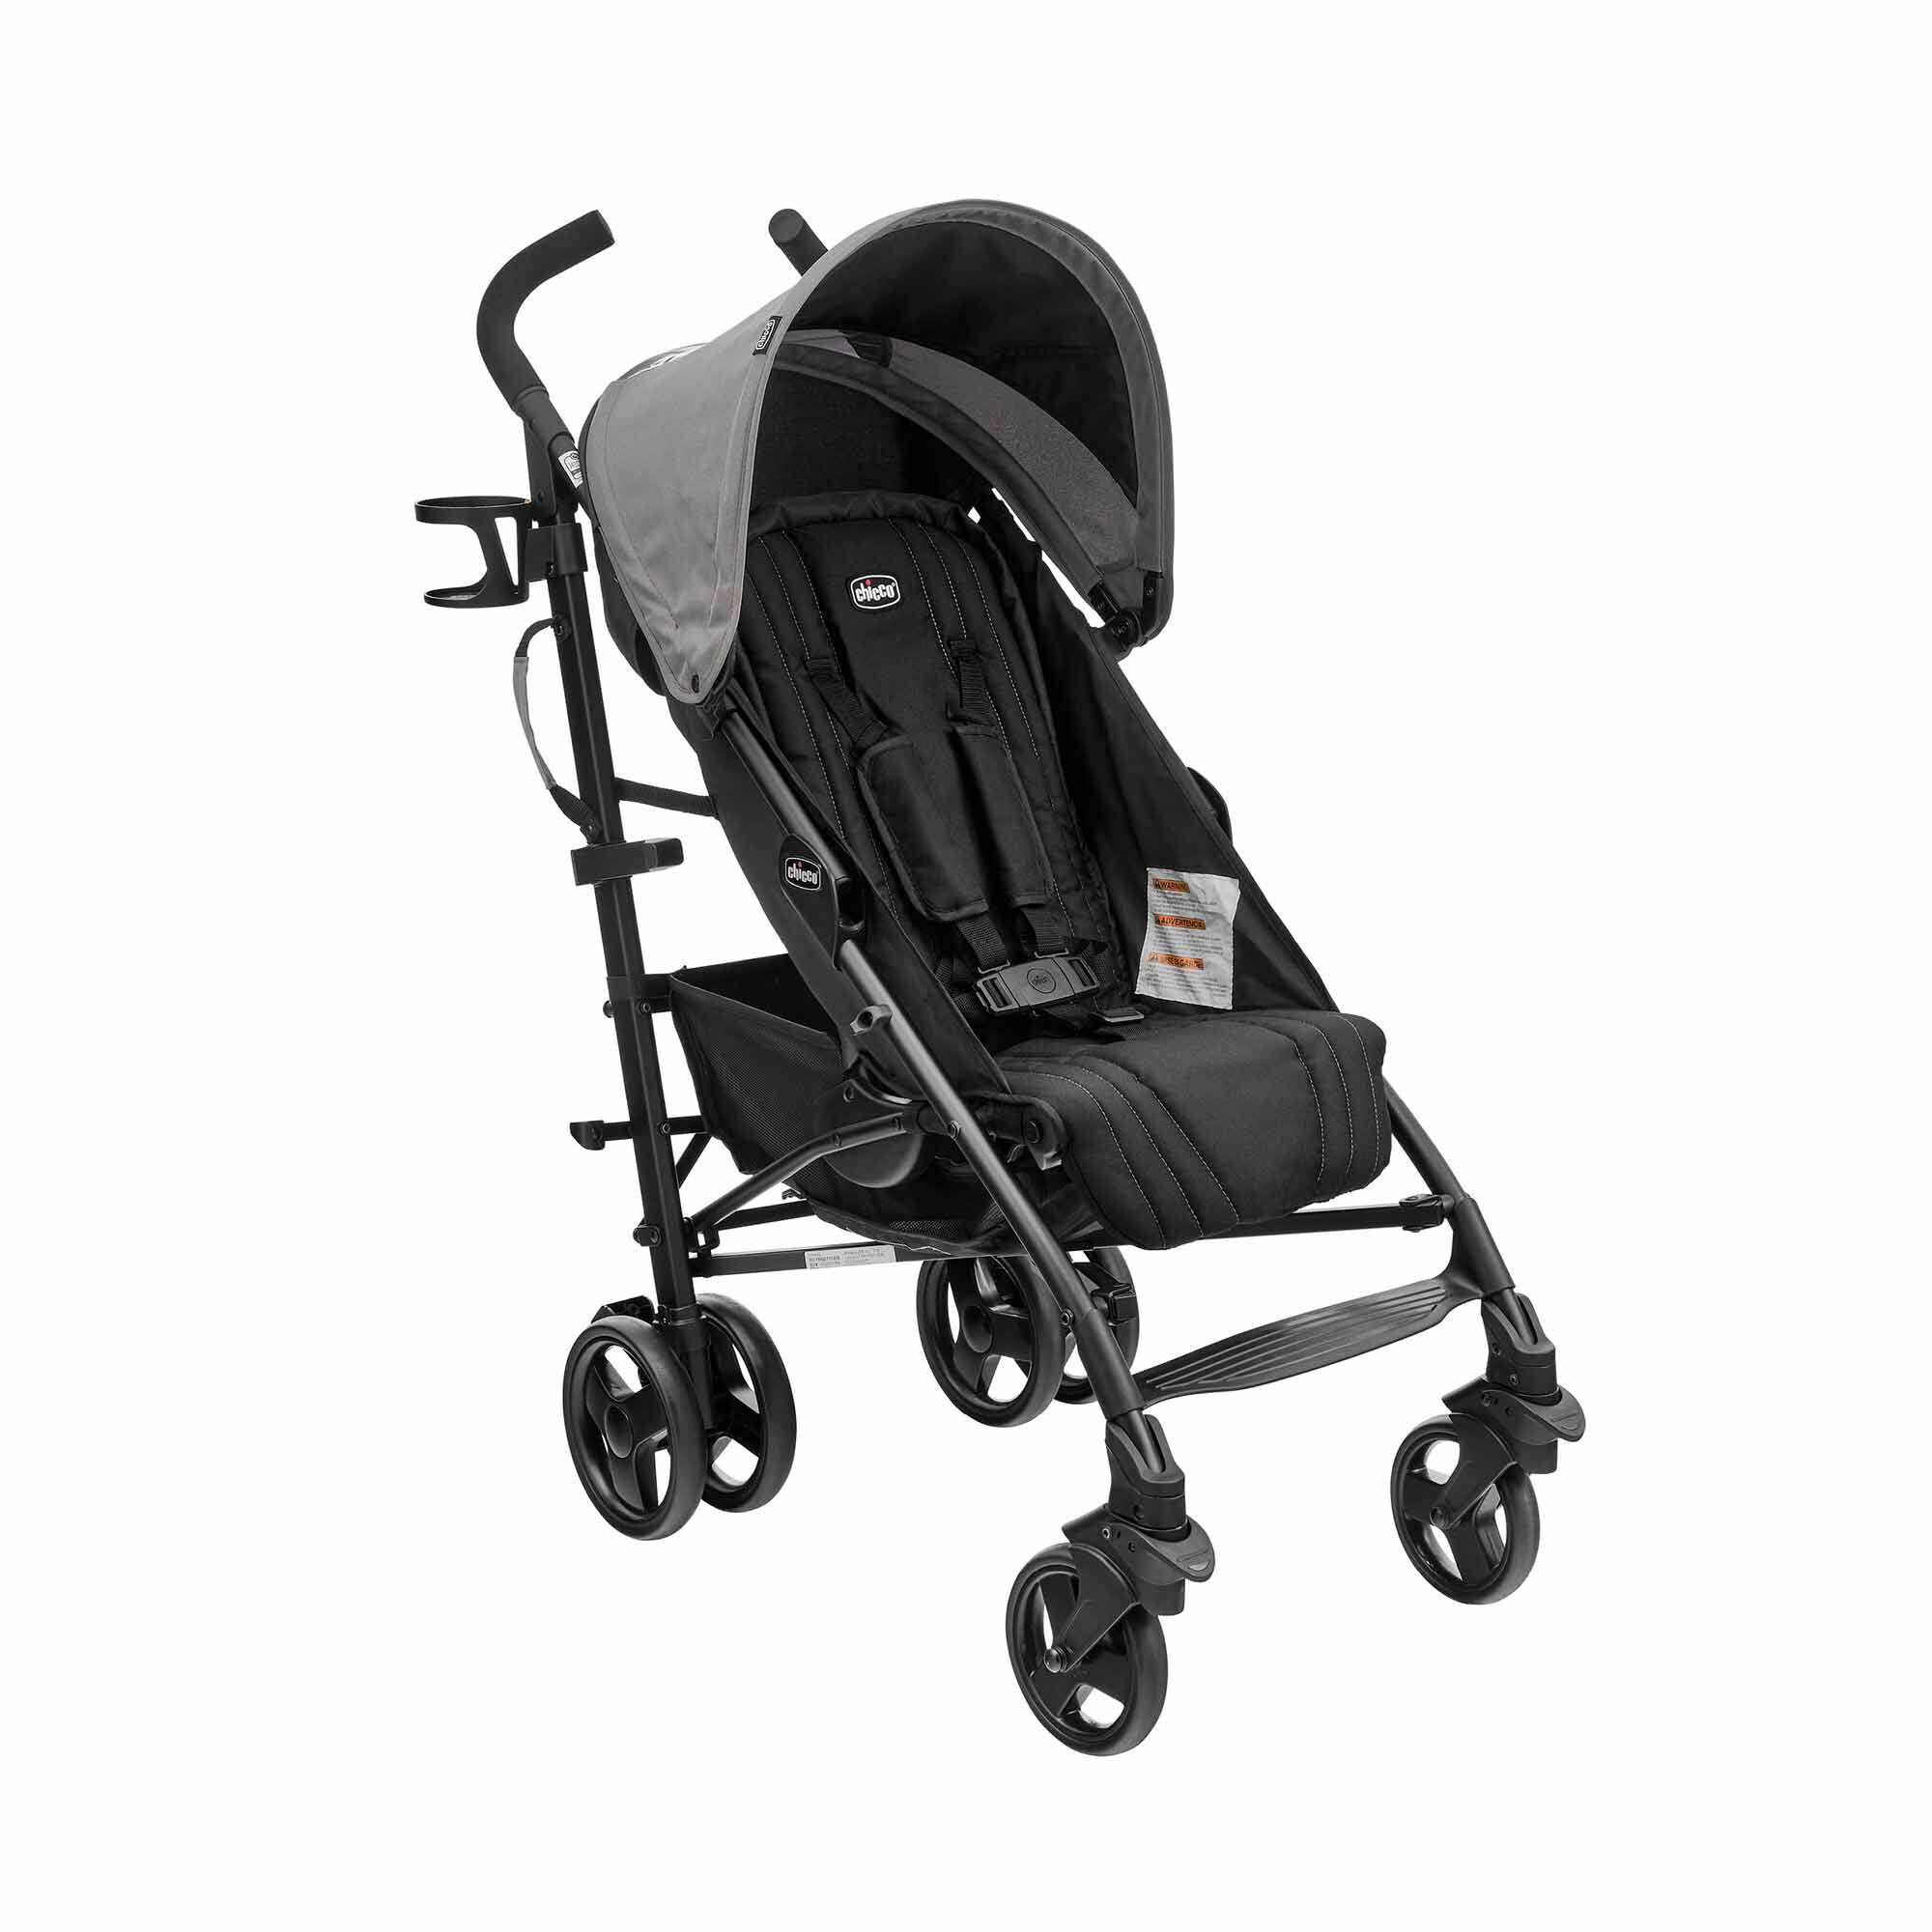 1 Unit 7500 g Supports up to 22 kg Black Denim and Ecoleather Intrigue Lightweight and Compact Pushchair Chicco Chicco Liteway 3 